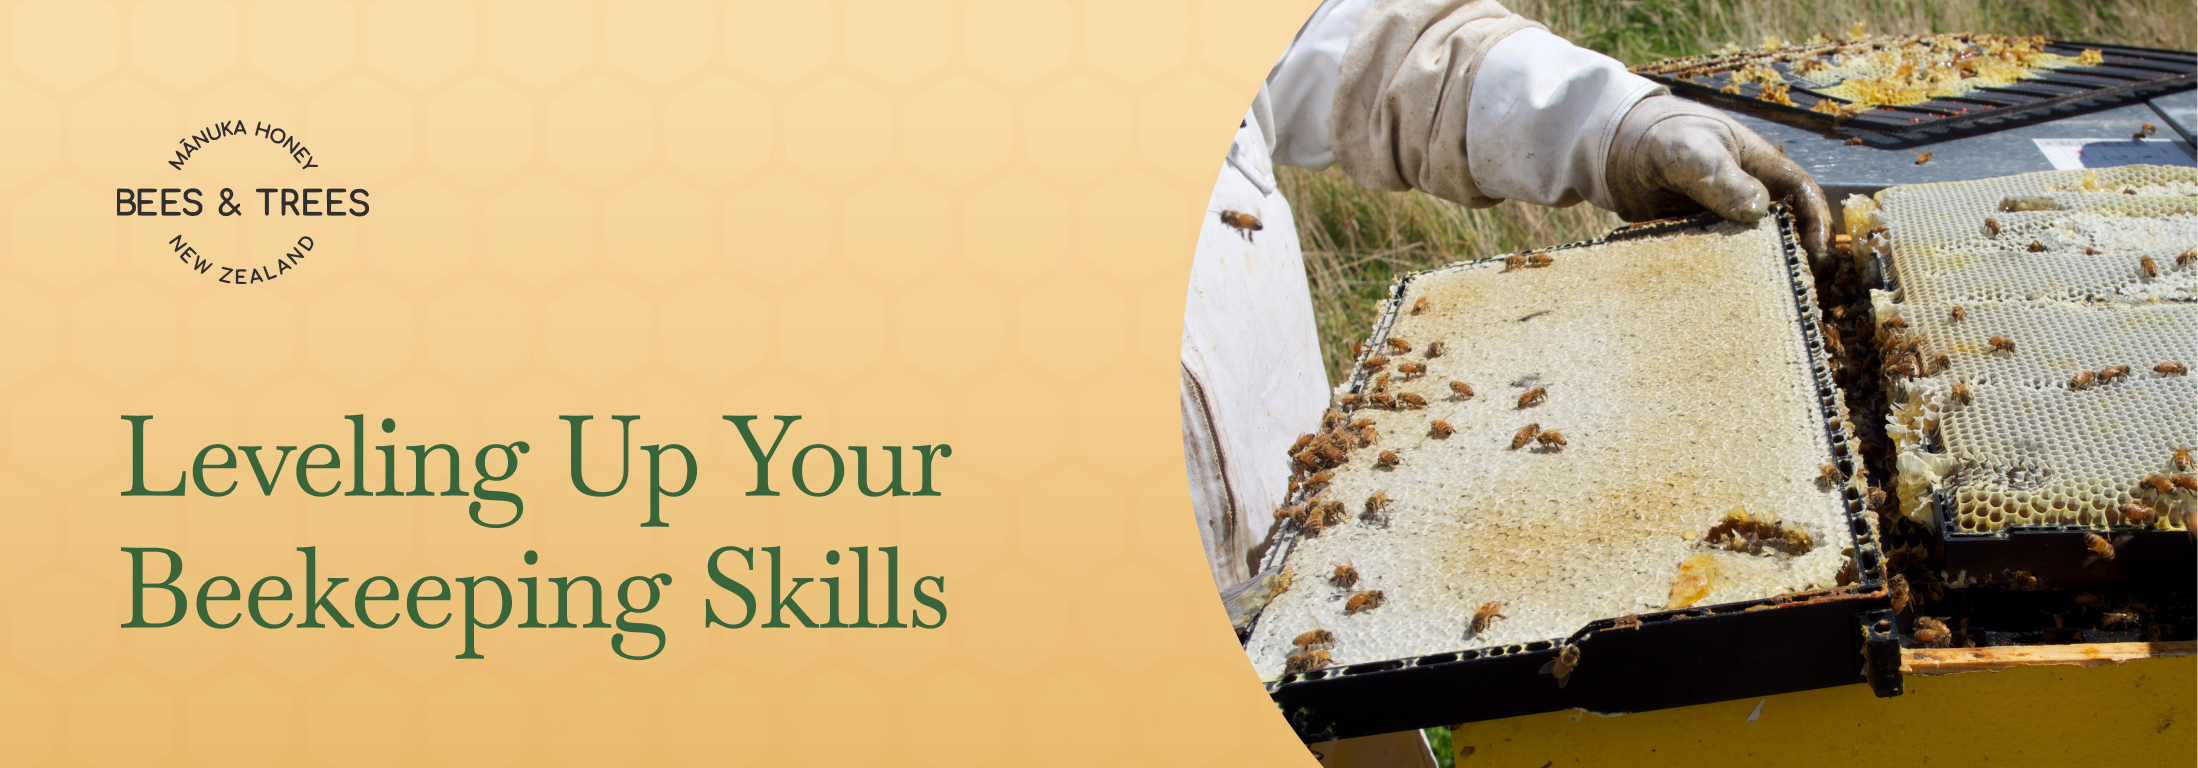 Leveling Up Your Beekeeping Skills